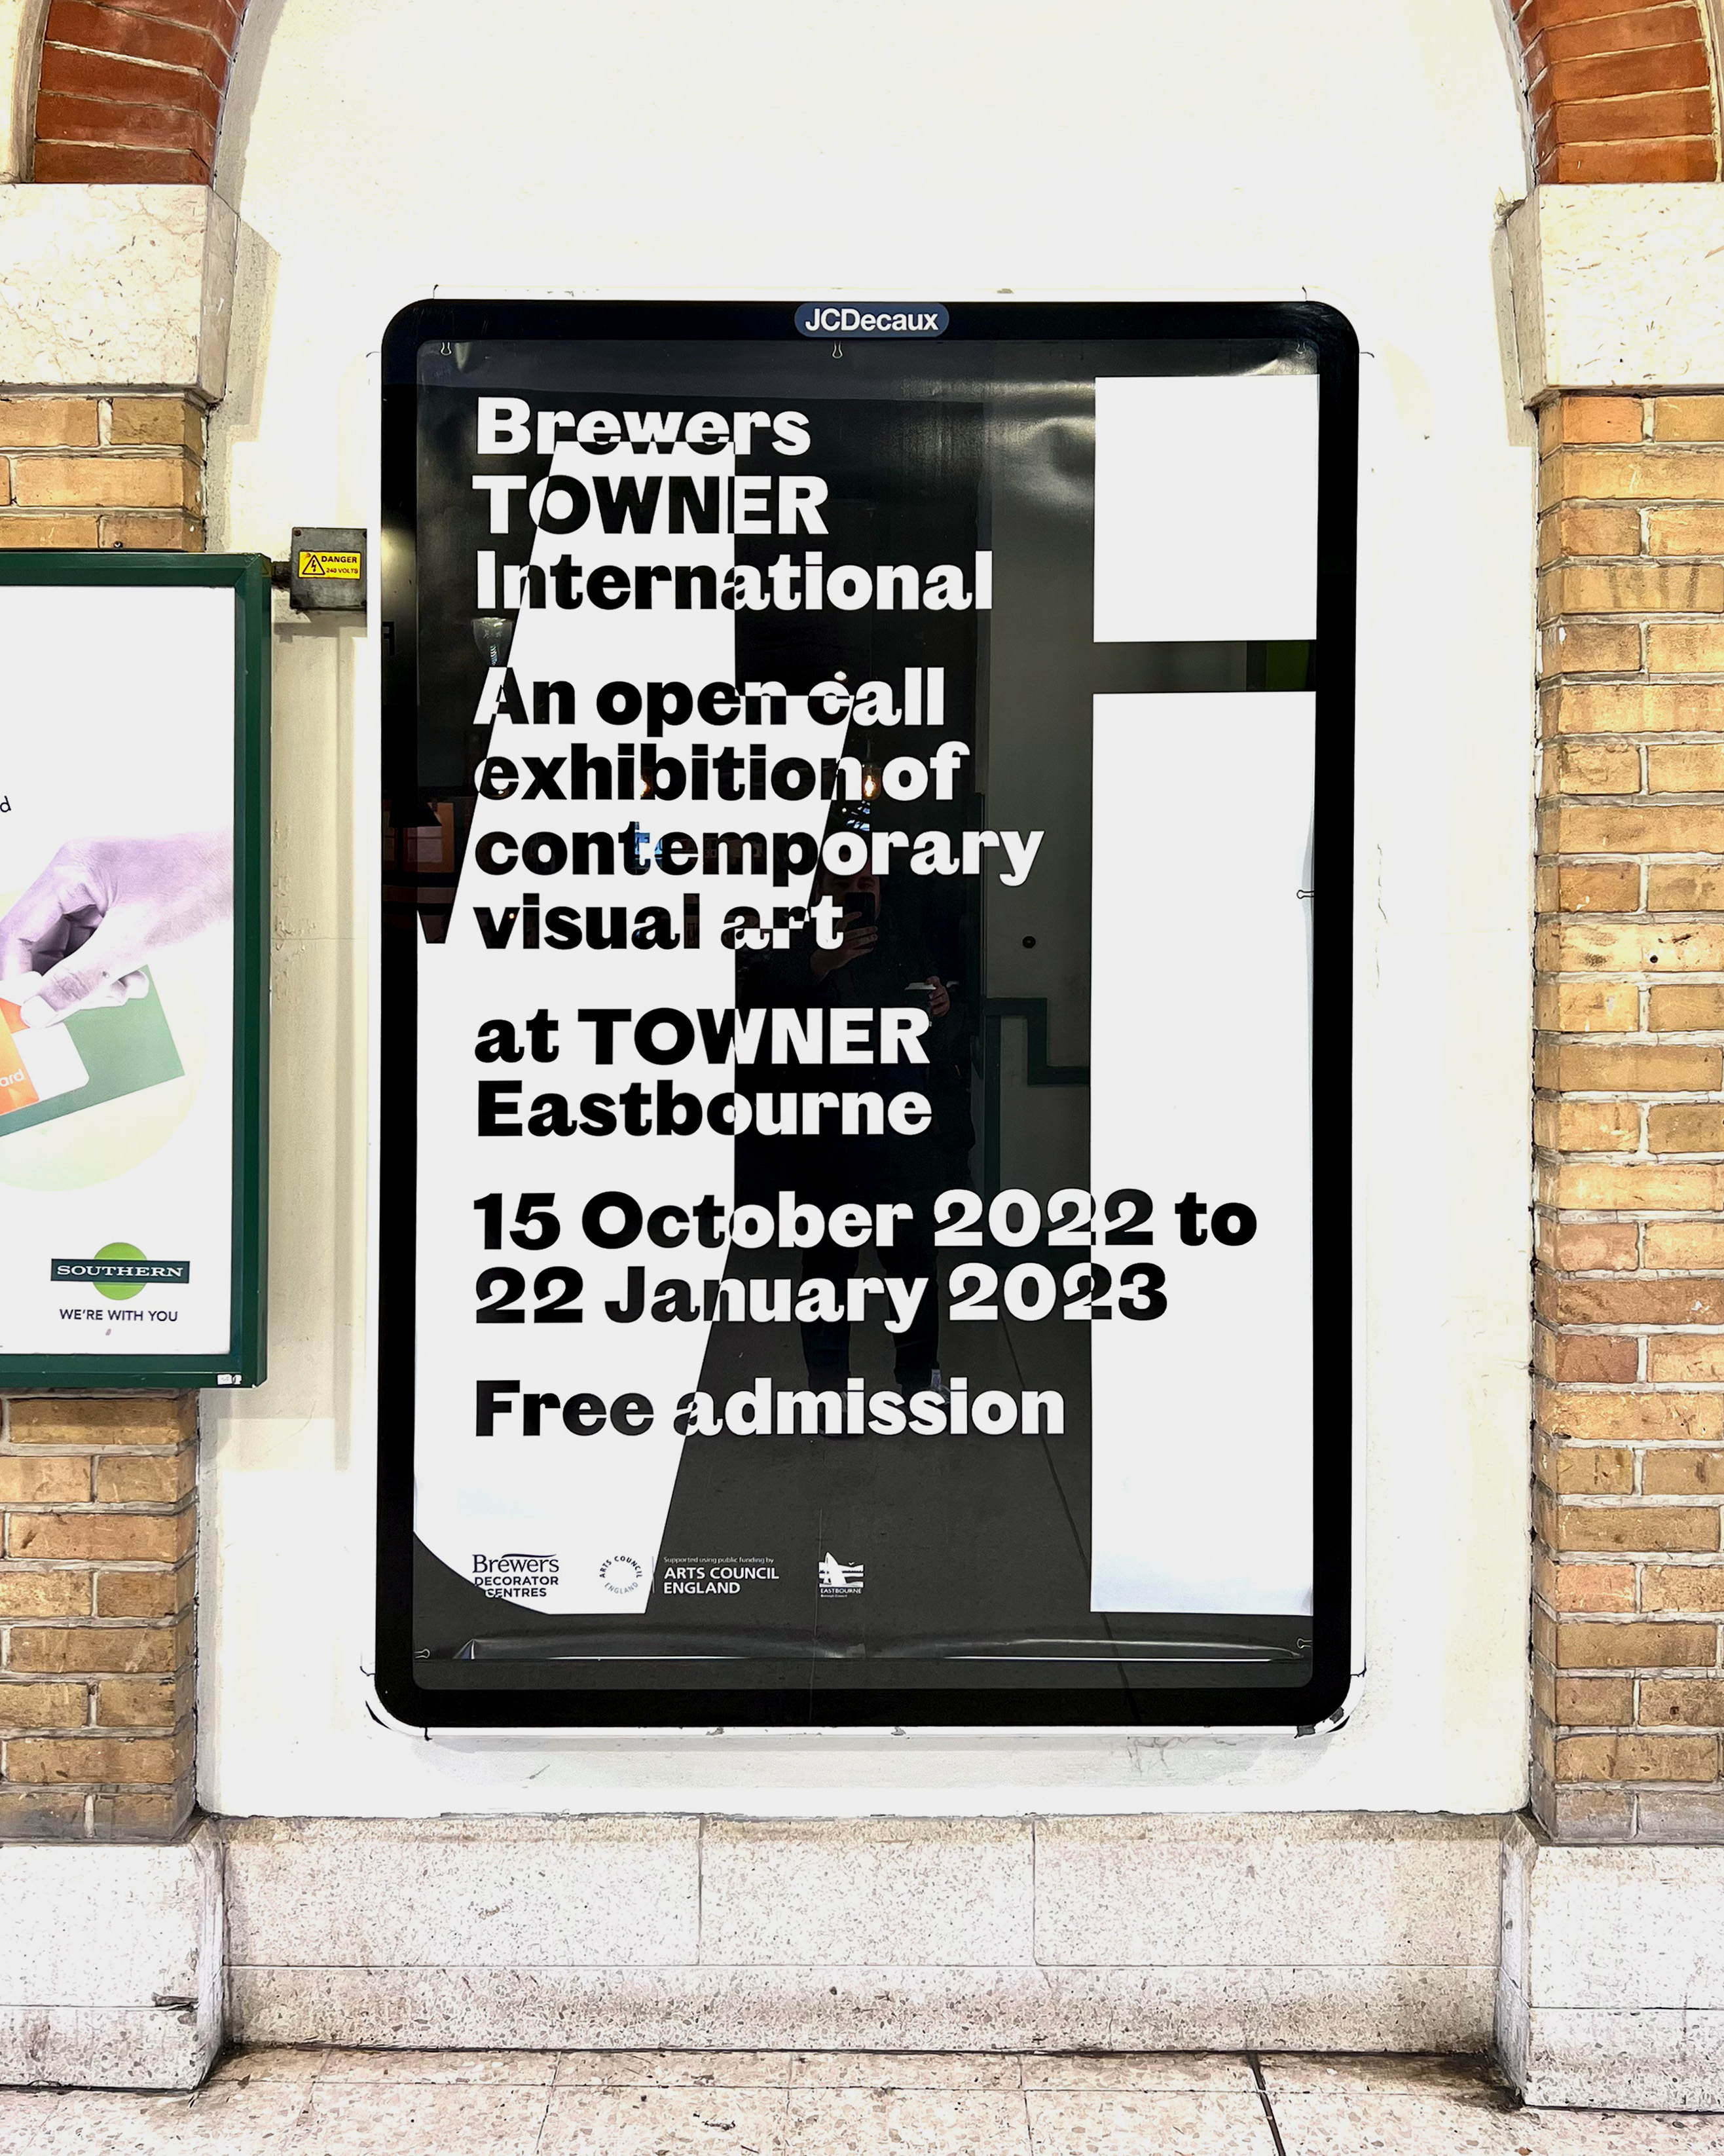 A Brewers Towner International poster in London Victoria station.